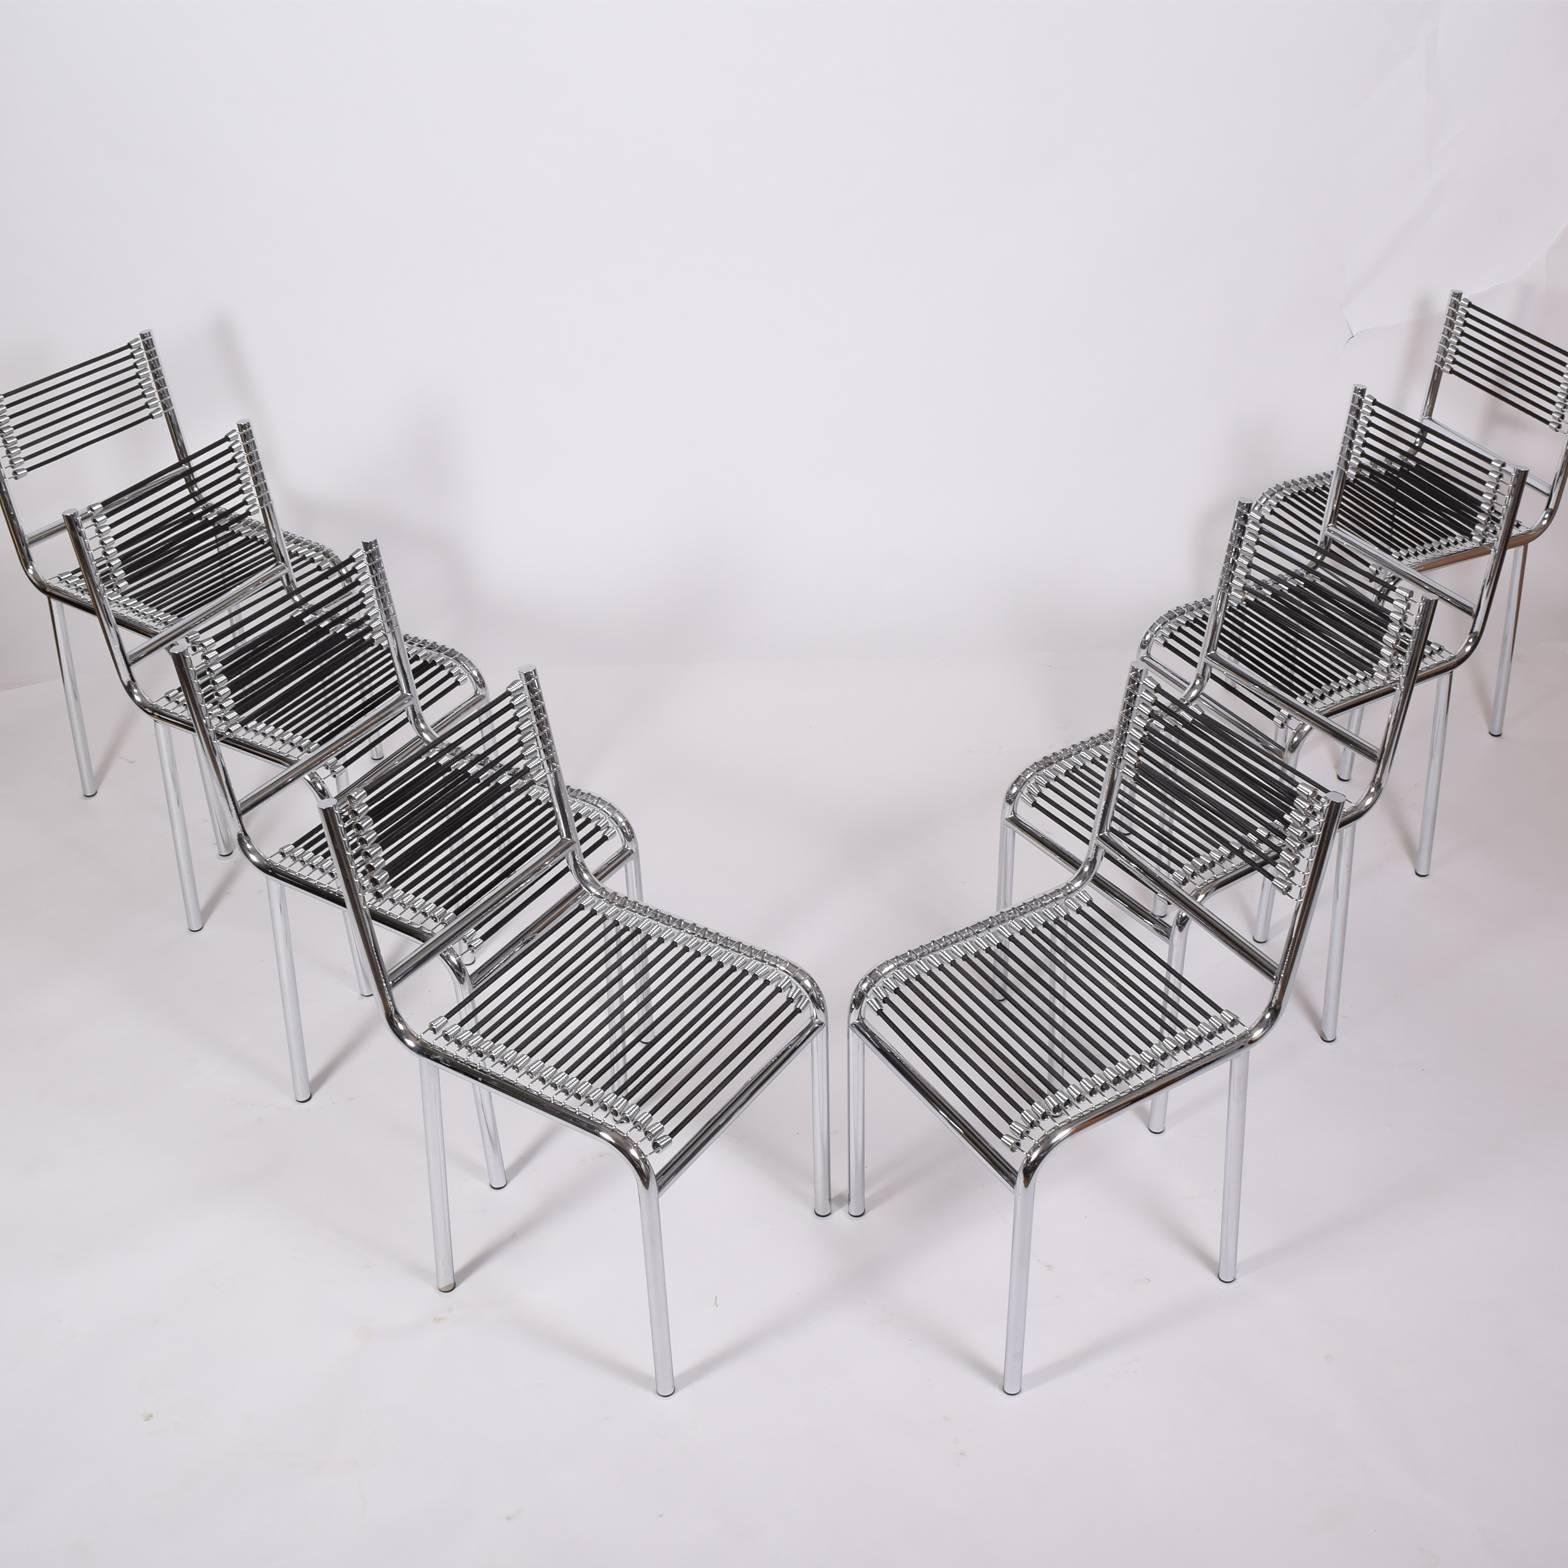 Nickel-plated frame with elastic cord seating. From an Herbst design in 1928, these from a 1980s edition. Reduced in price from $4200 set to $3200 set.